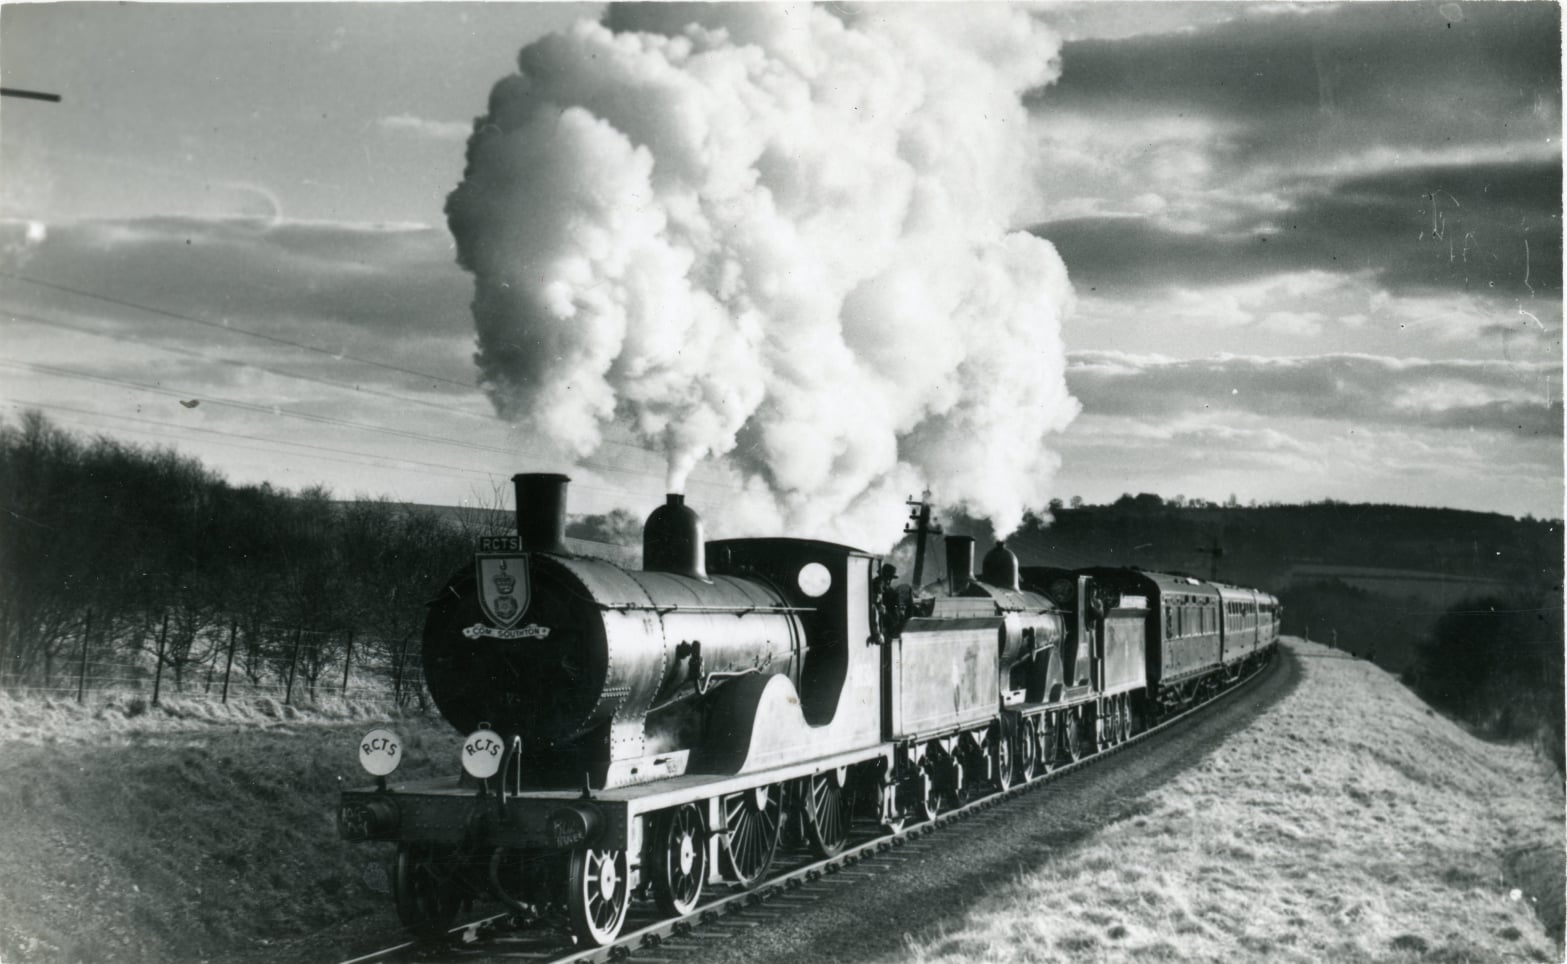 The RCTS Special 6 Feb 1955 - the Hampshireman. The train has left West Meon and is climbing to Privett Tunnel.